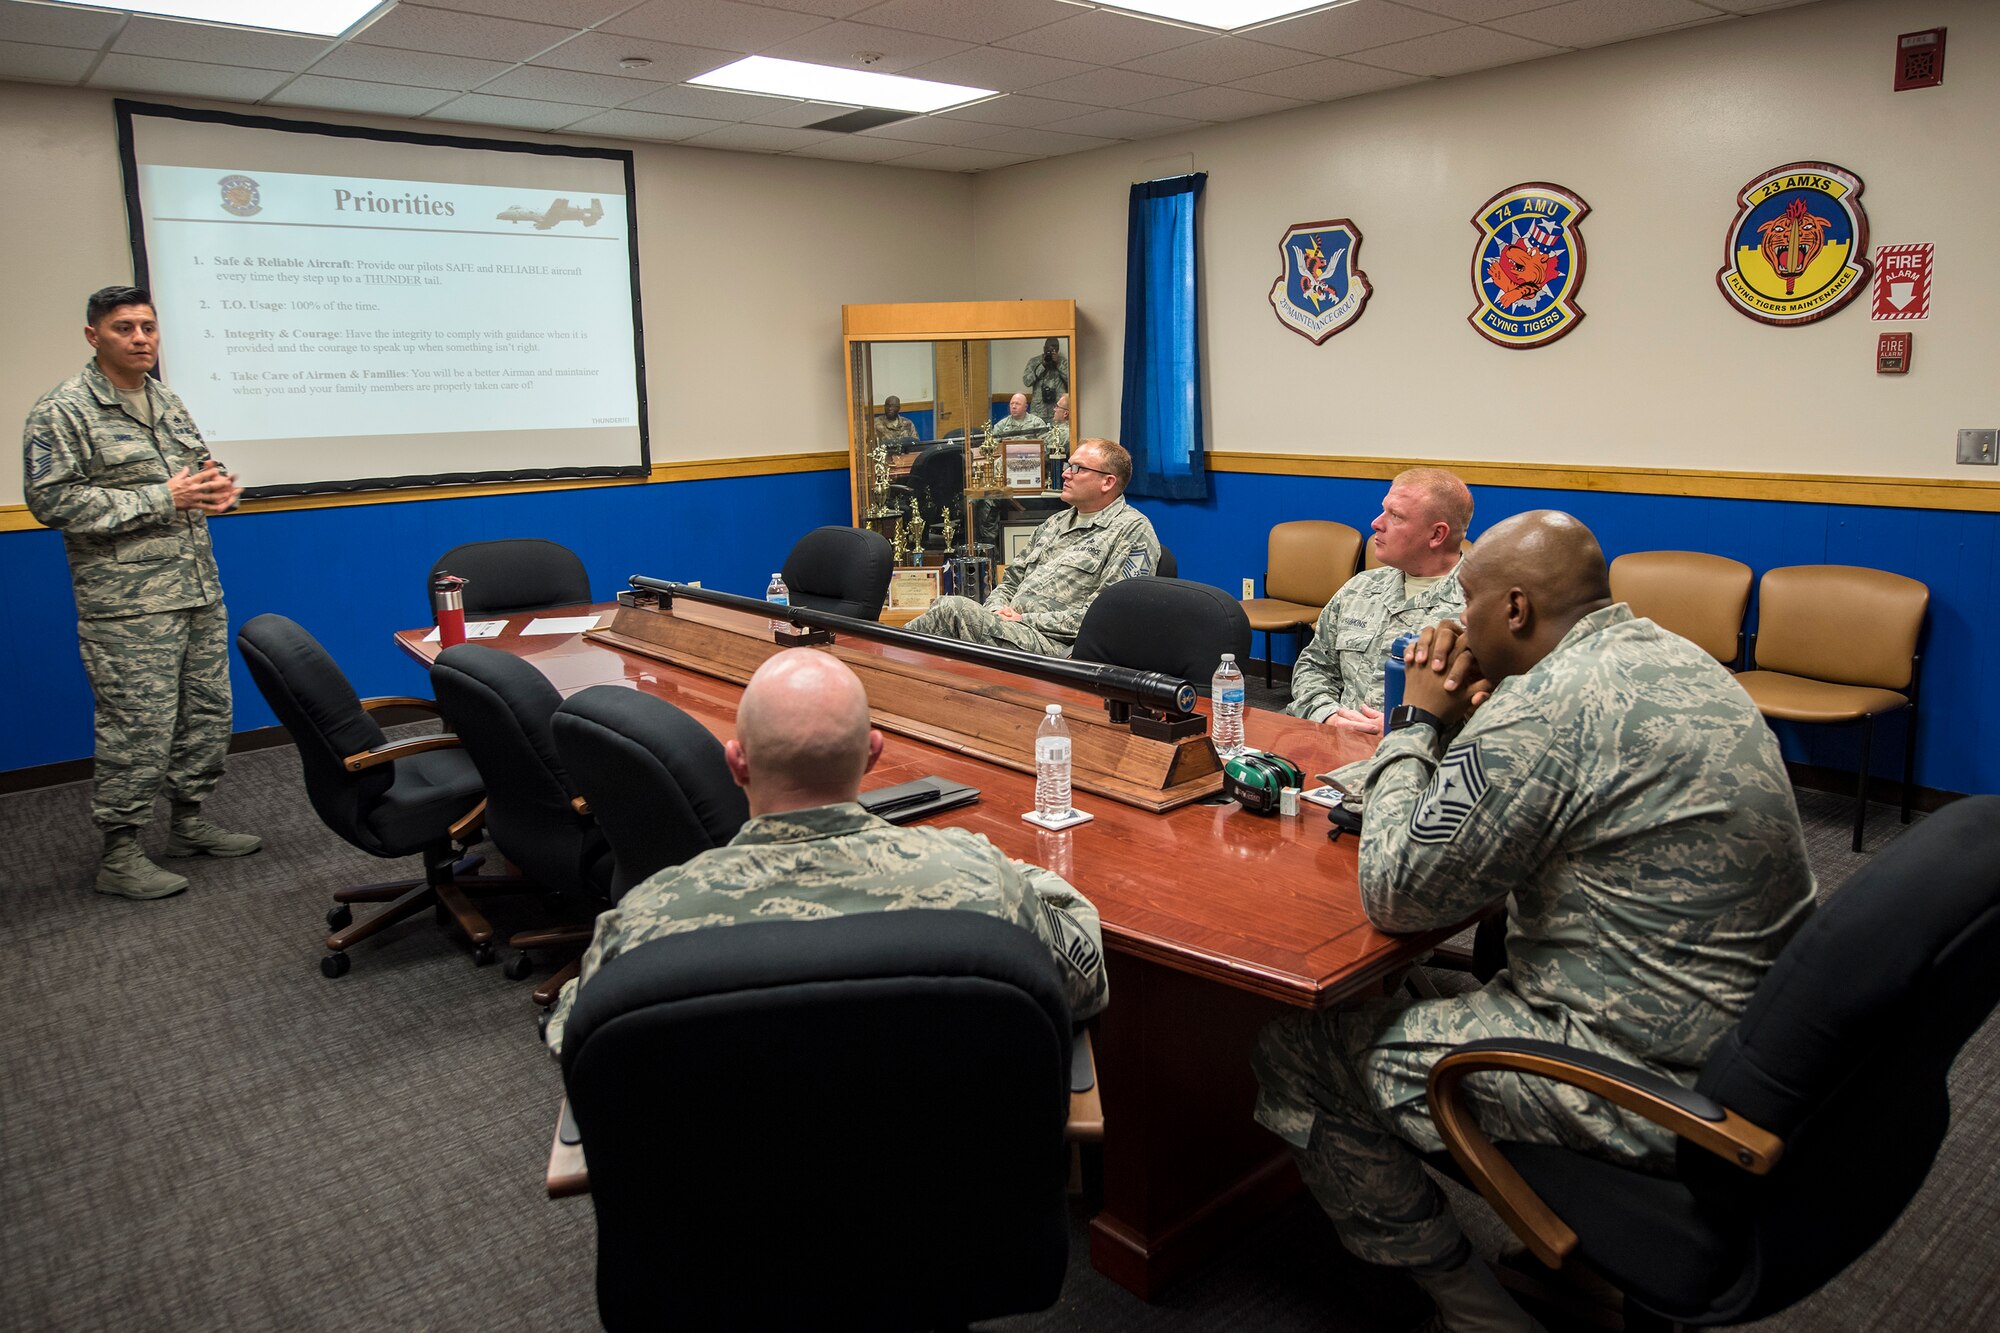 Senior Master Sgt. Raul Lopez, 74th Aircraft Maintenance Unit superintendent, left, briefs Chief Master Sgt. James Allen, 23d Wing command chief, far right, during an immersion tour, July 10, 2018, at Moody Air Force Base, Ga. Allen toured the 23d Aircraft Maintenance Squadron (AMXS) to build rapport and experience the day to day operations of maintenance Airmen.  Throughout his visit, Allen was able to speak with Airmen and hear their opinions and ideas behind the continued success of the AMXS. (U.S. Air Force photo by Airman 1st Class Eugene Oliver)